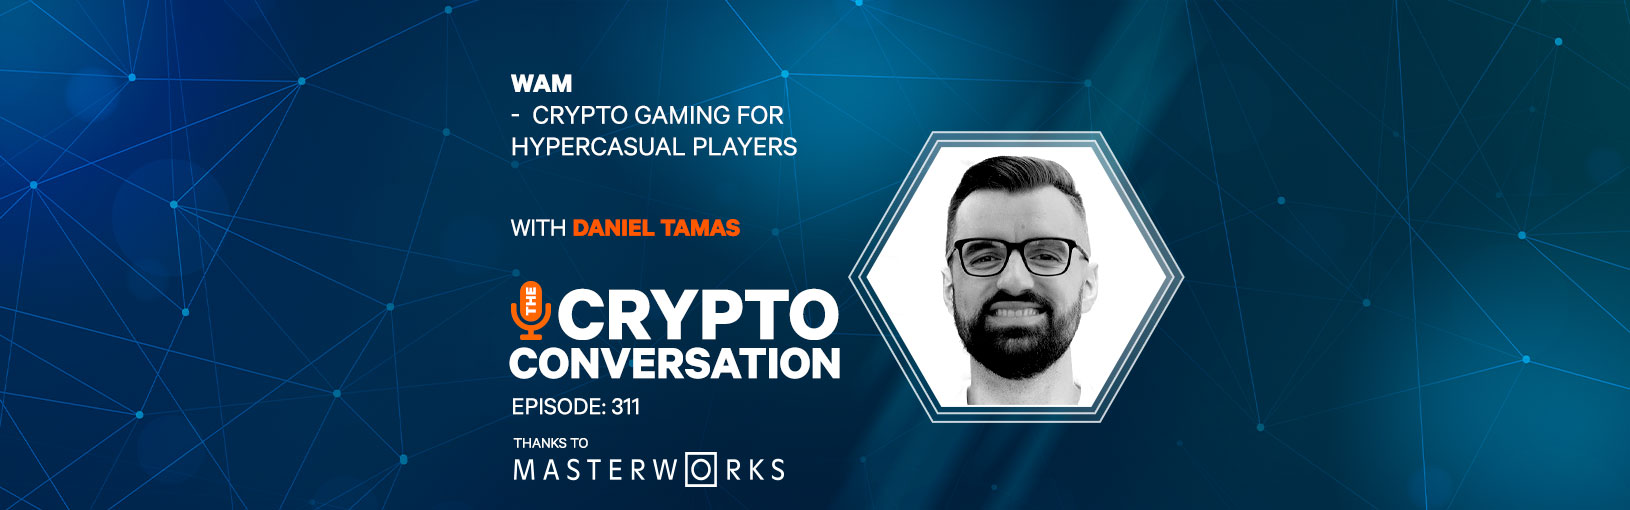 WAM – Crypto gaming for hypercasual players